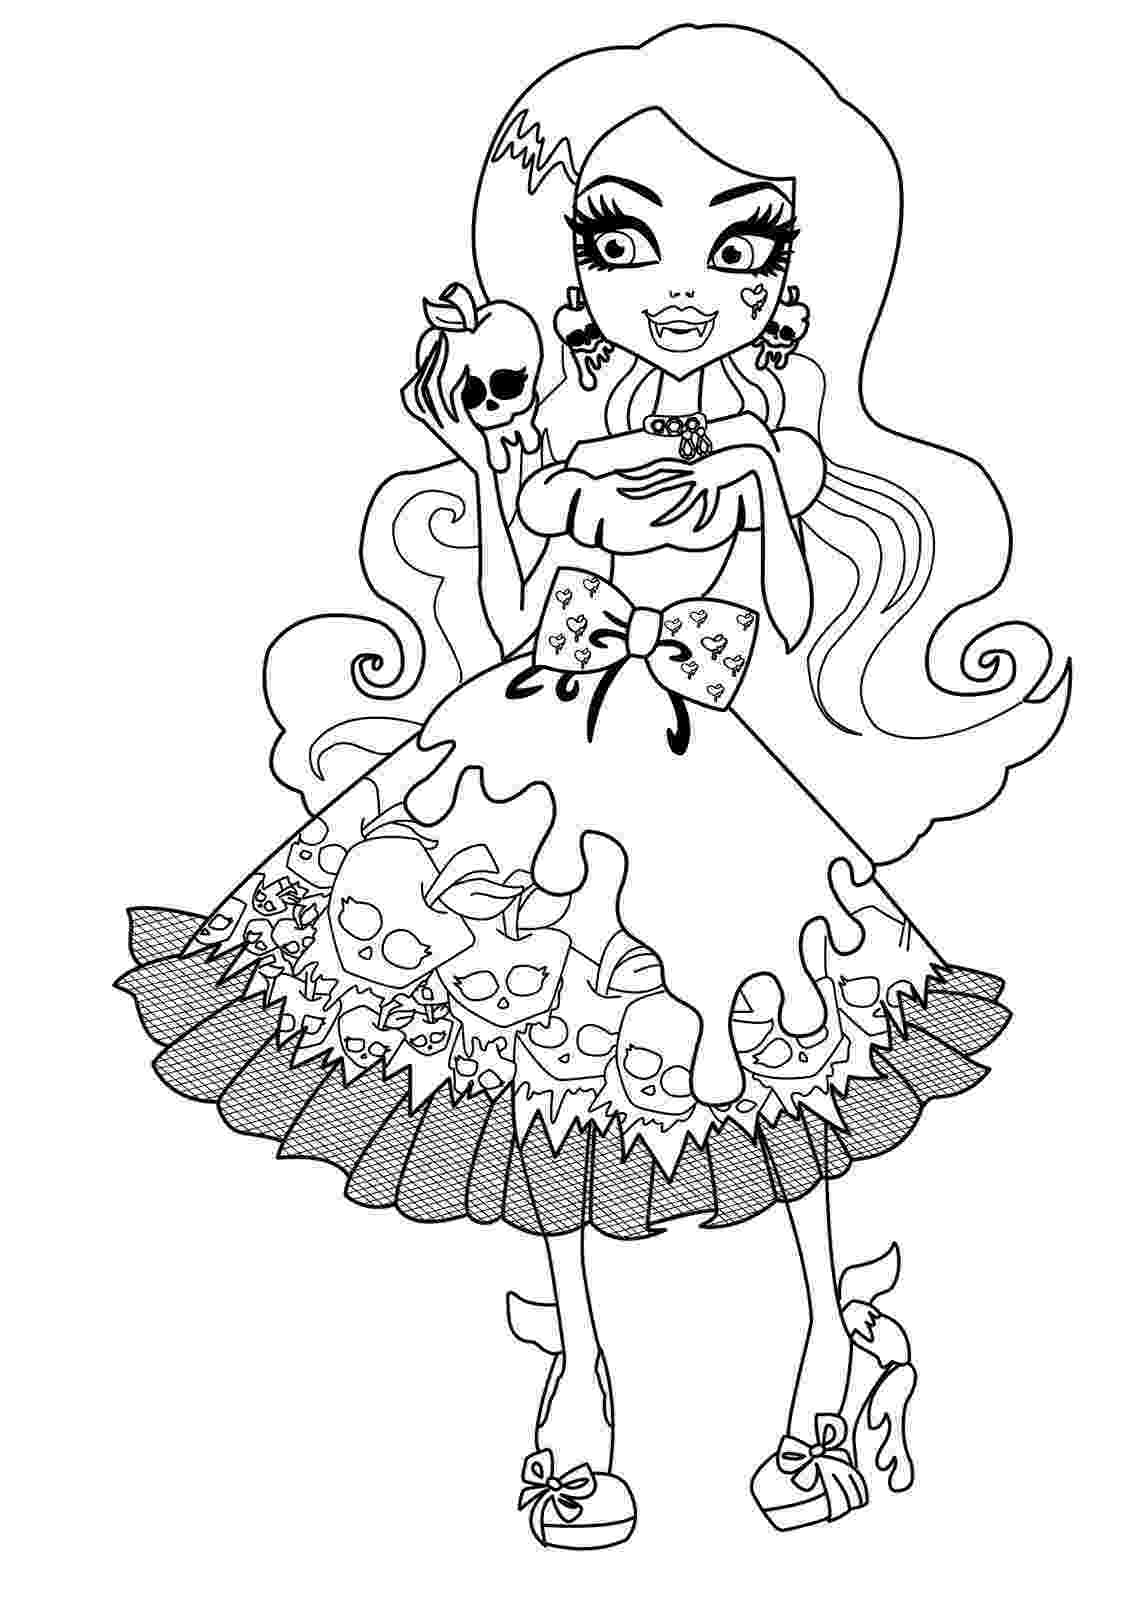 coloring pages of monster high dolls monster high catty noir coloring page free printable monster of dolls high coloring pages 